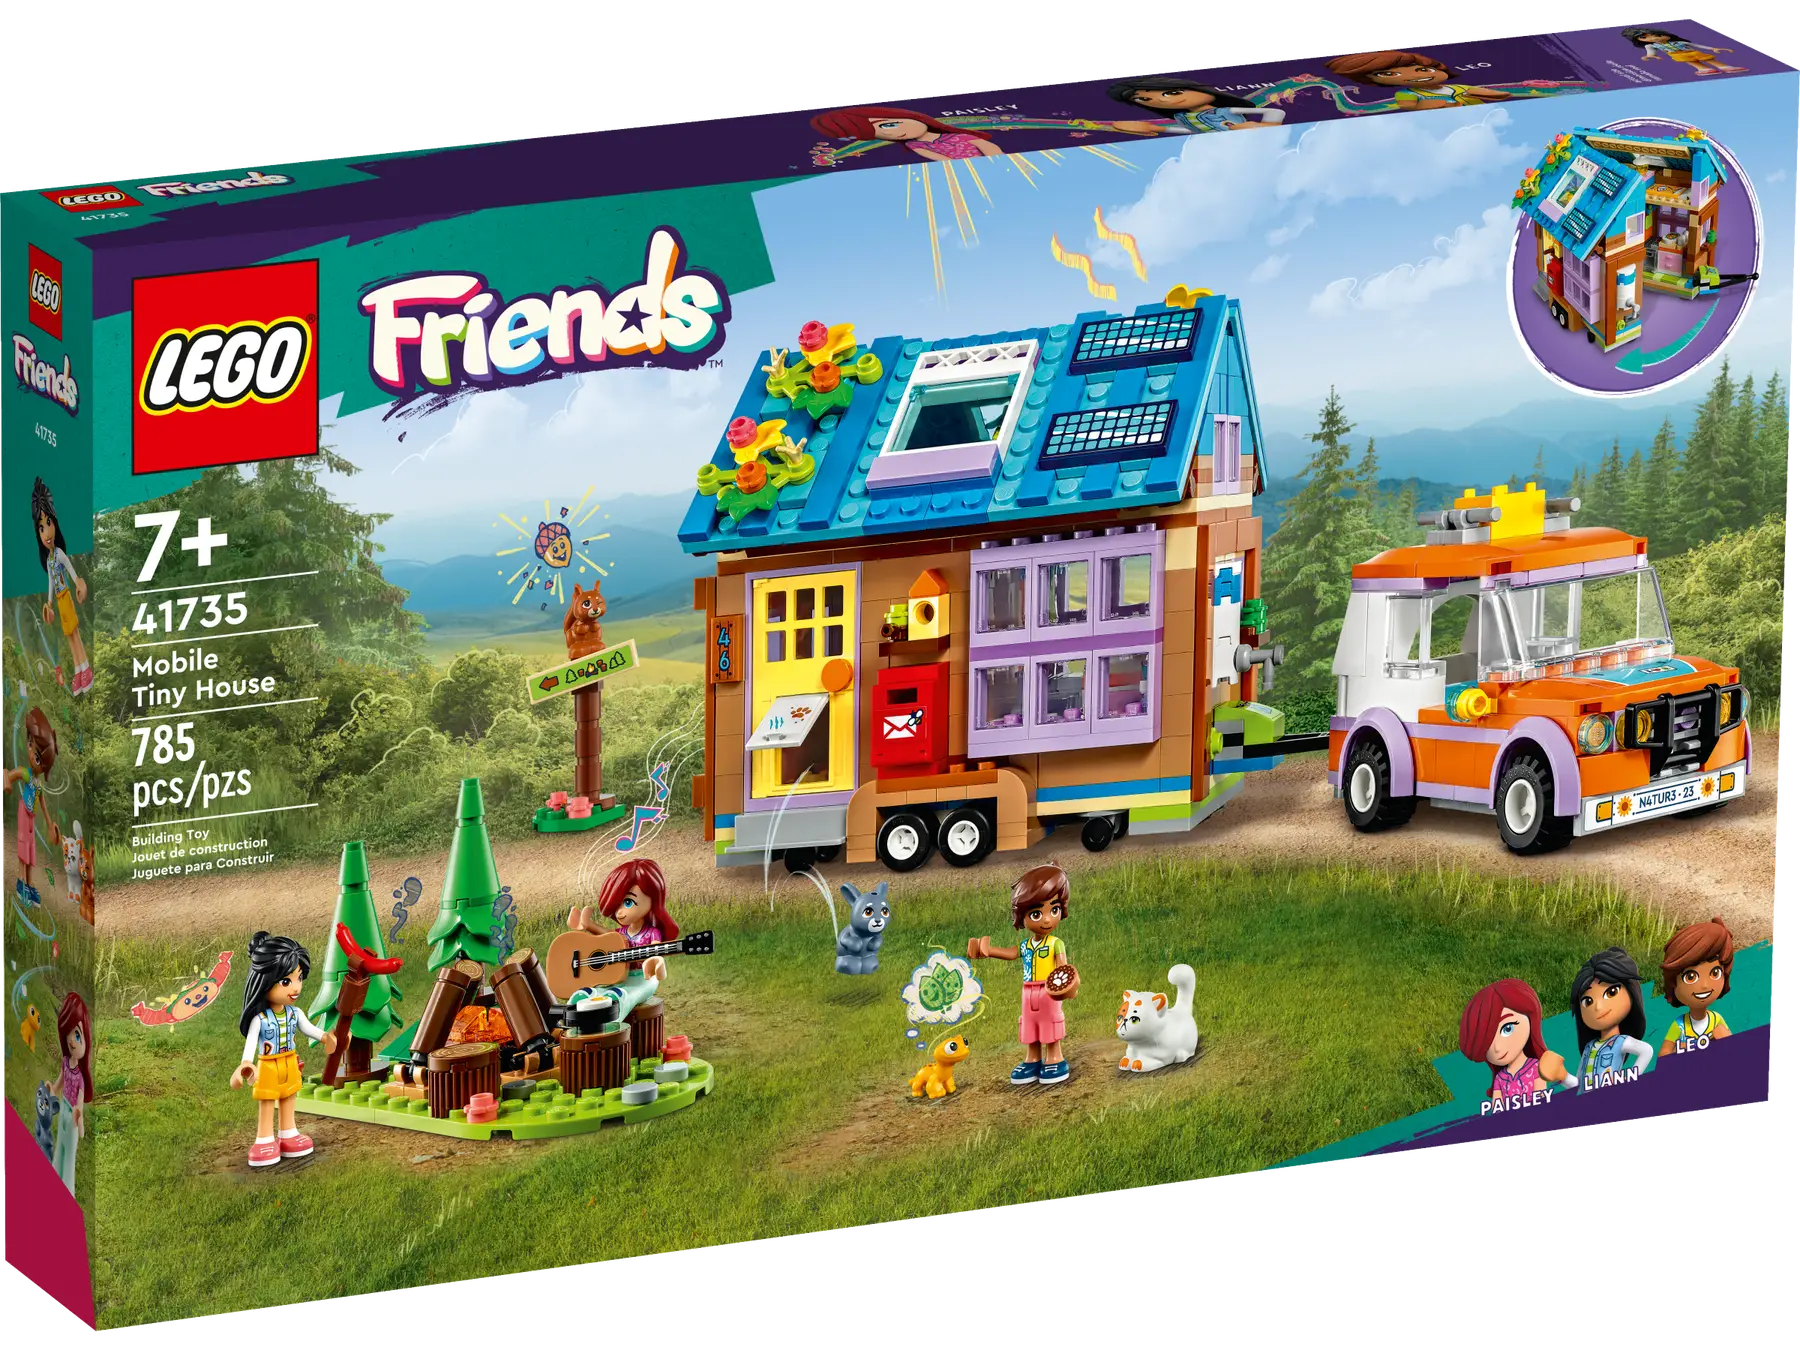 Lego Friends - Mobile Tiny House